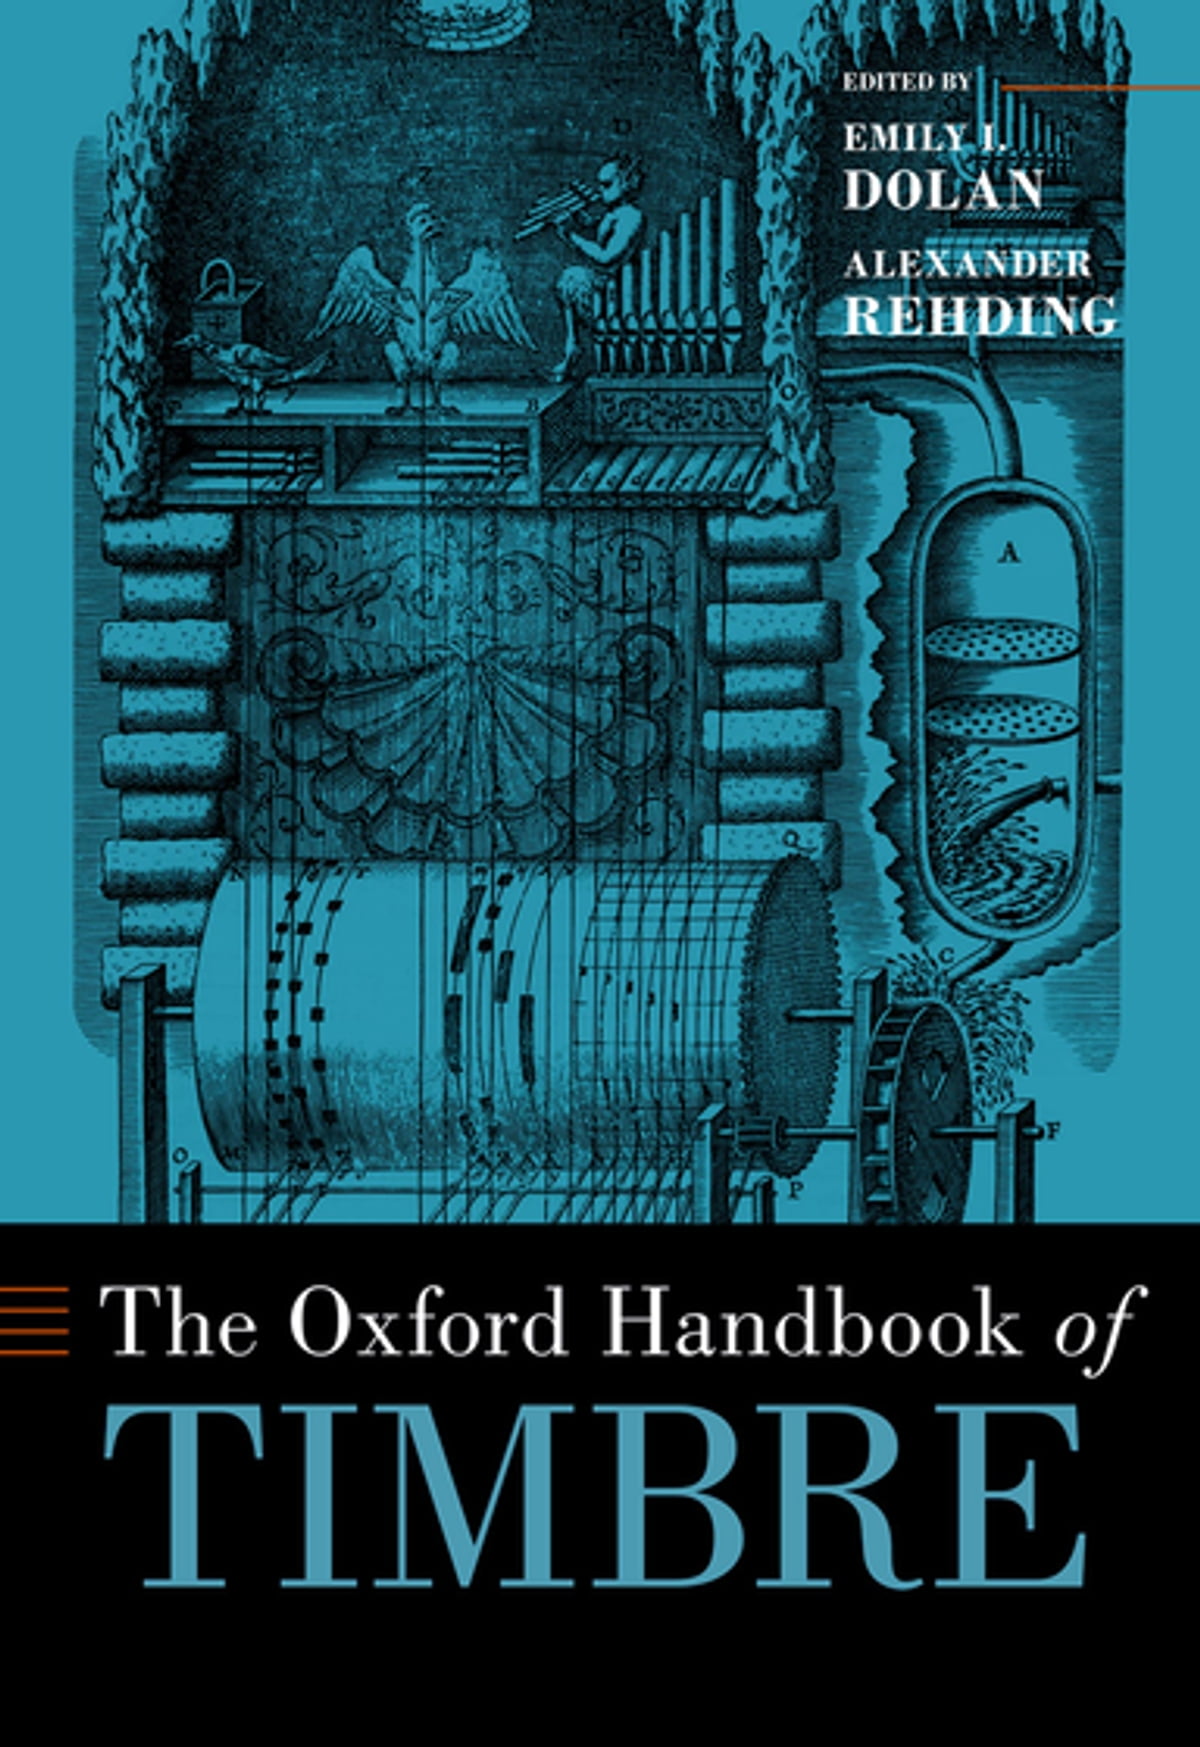 image of the cover of Dolan's book, The Oxford Handbook of Timbre